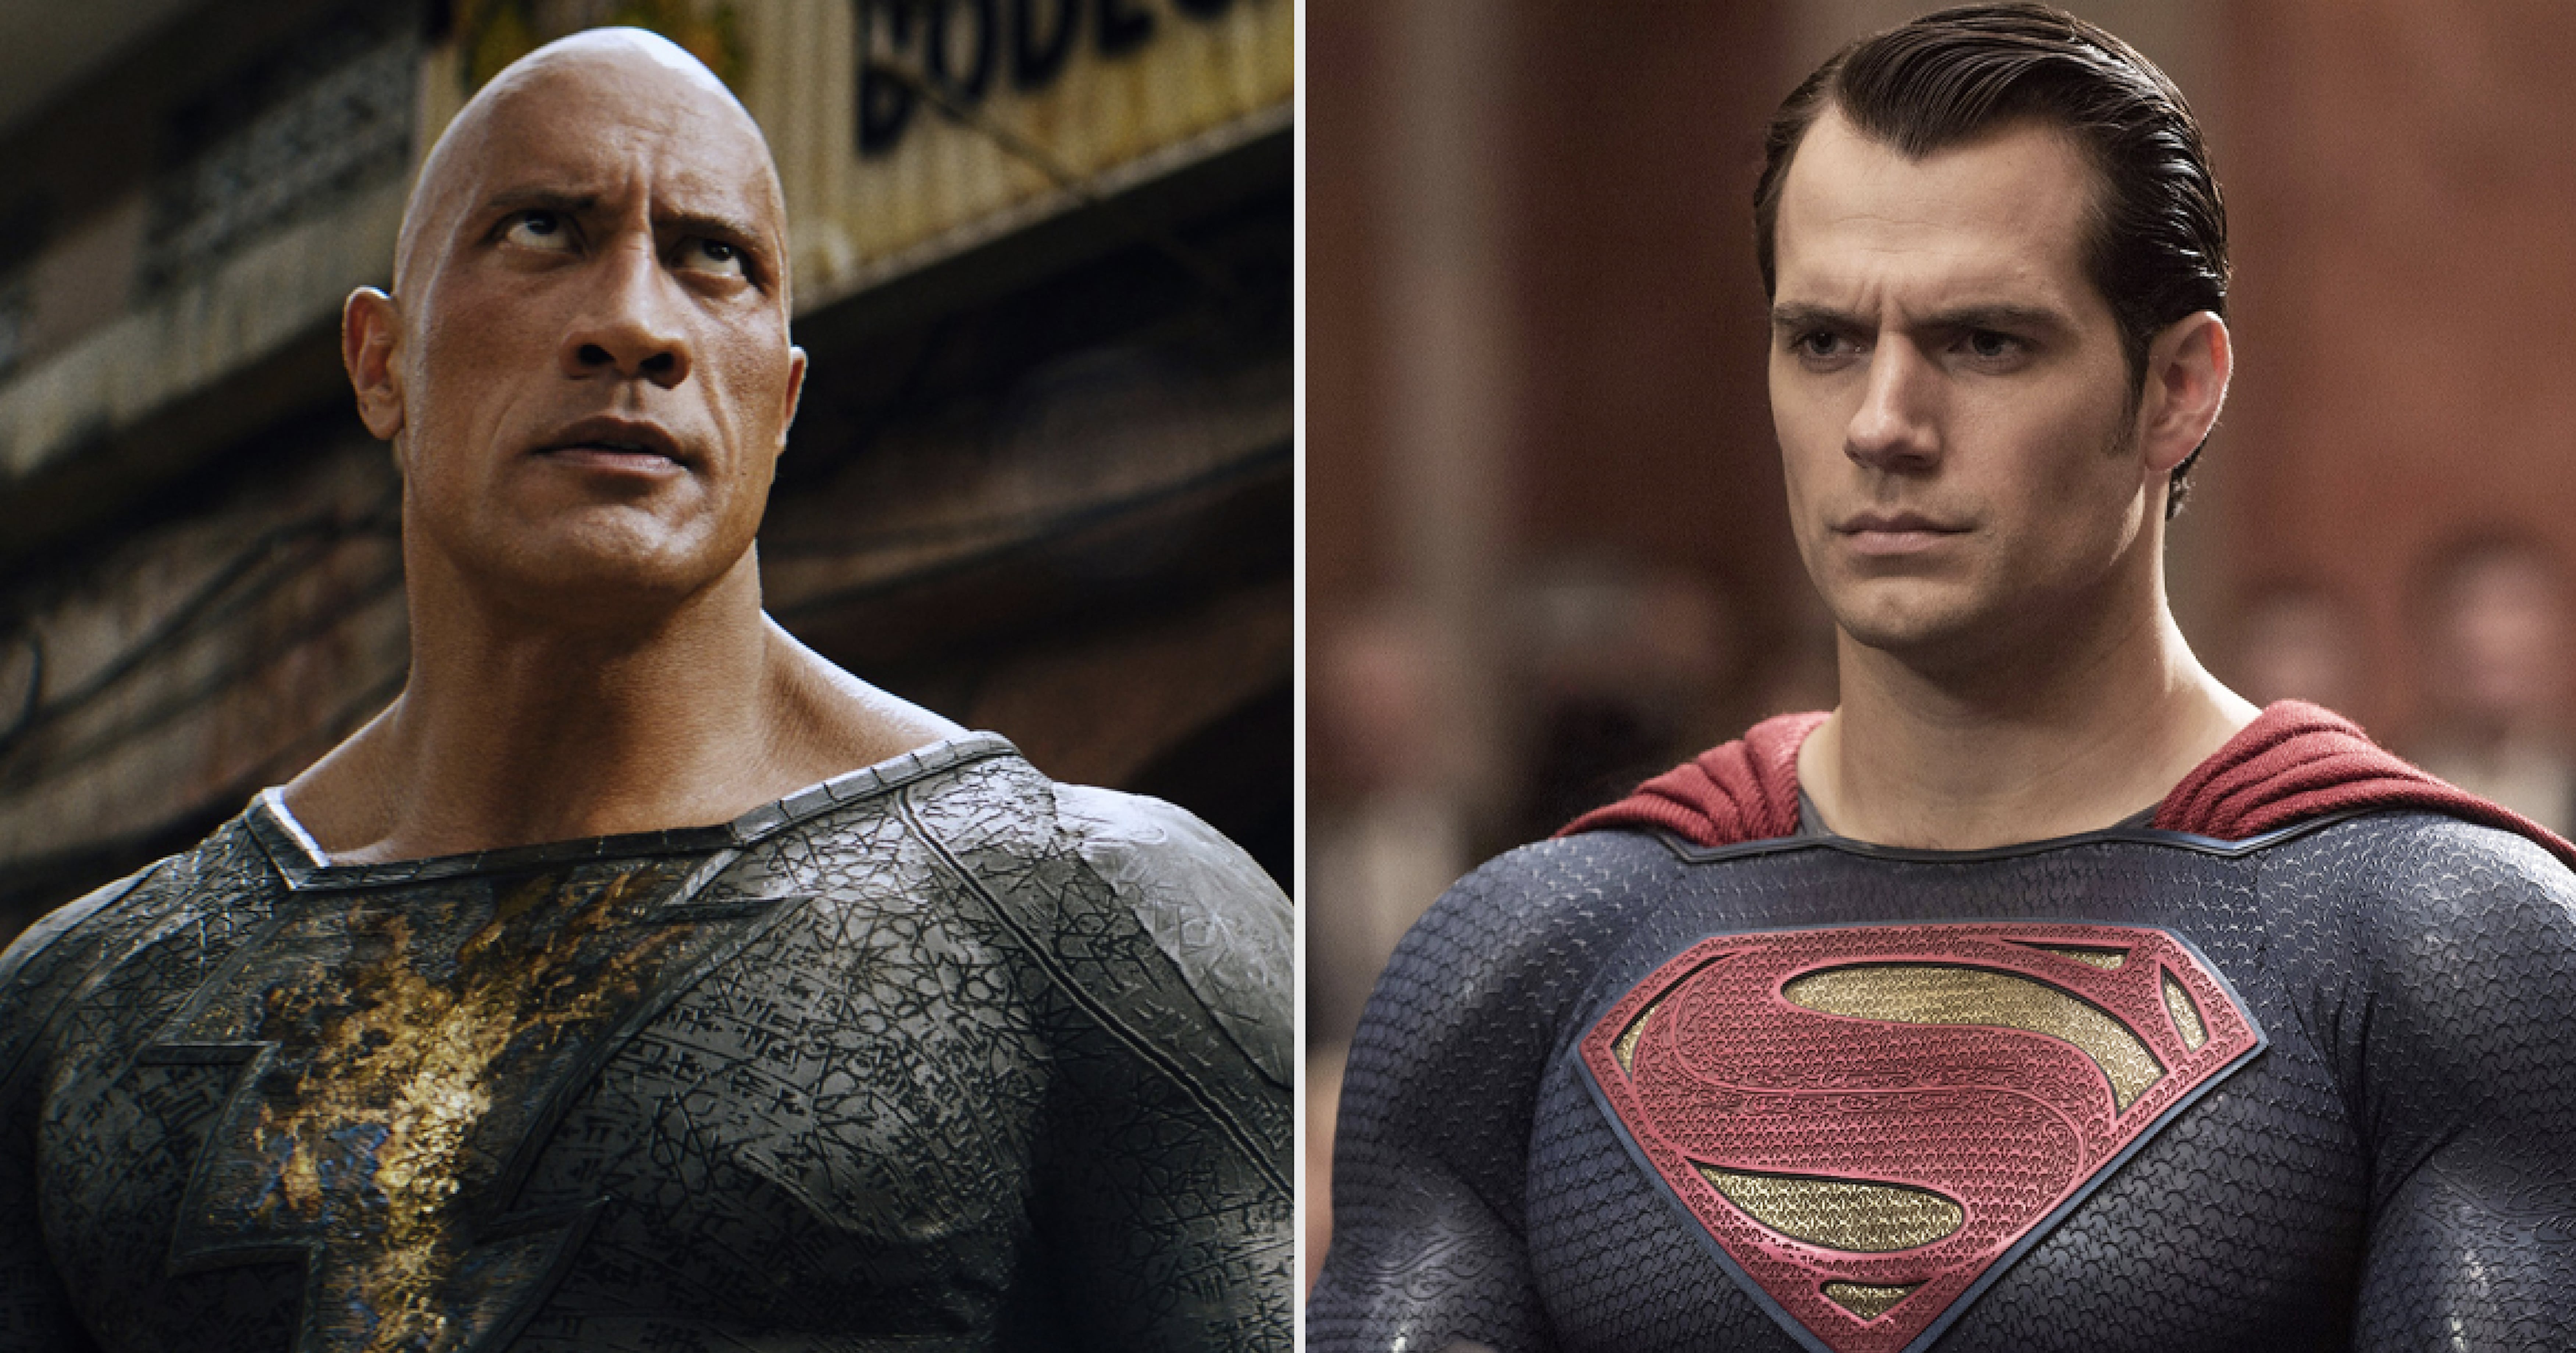 James Gunn Explains Why Henry Cavill Is Not His Superman! - DC UPDATES